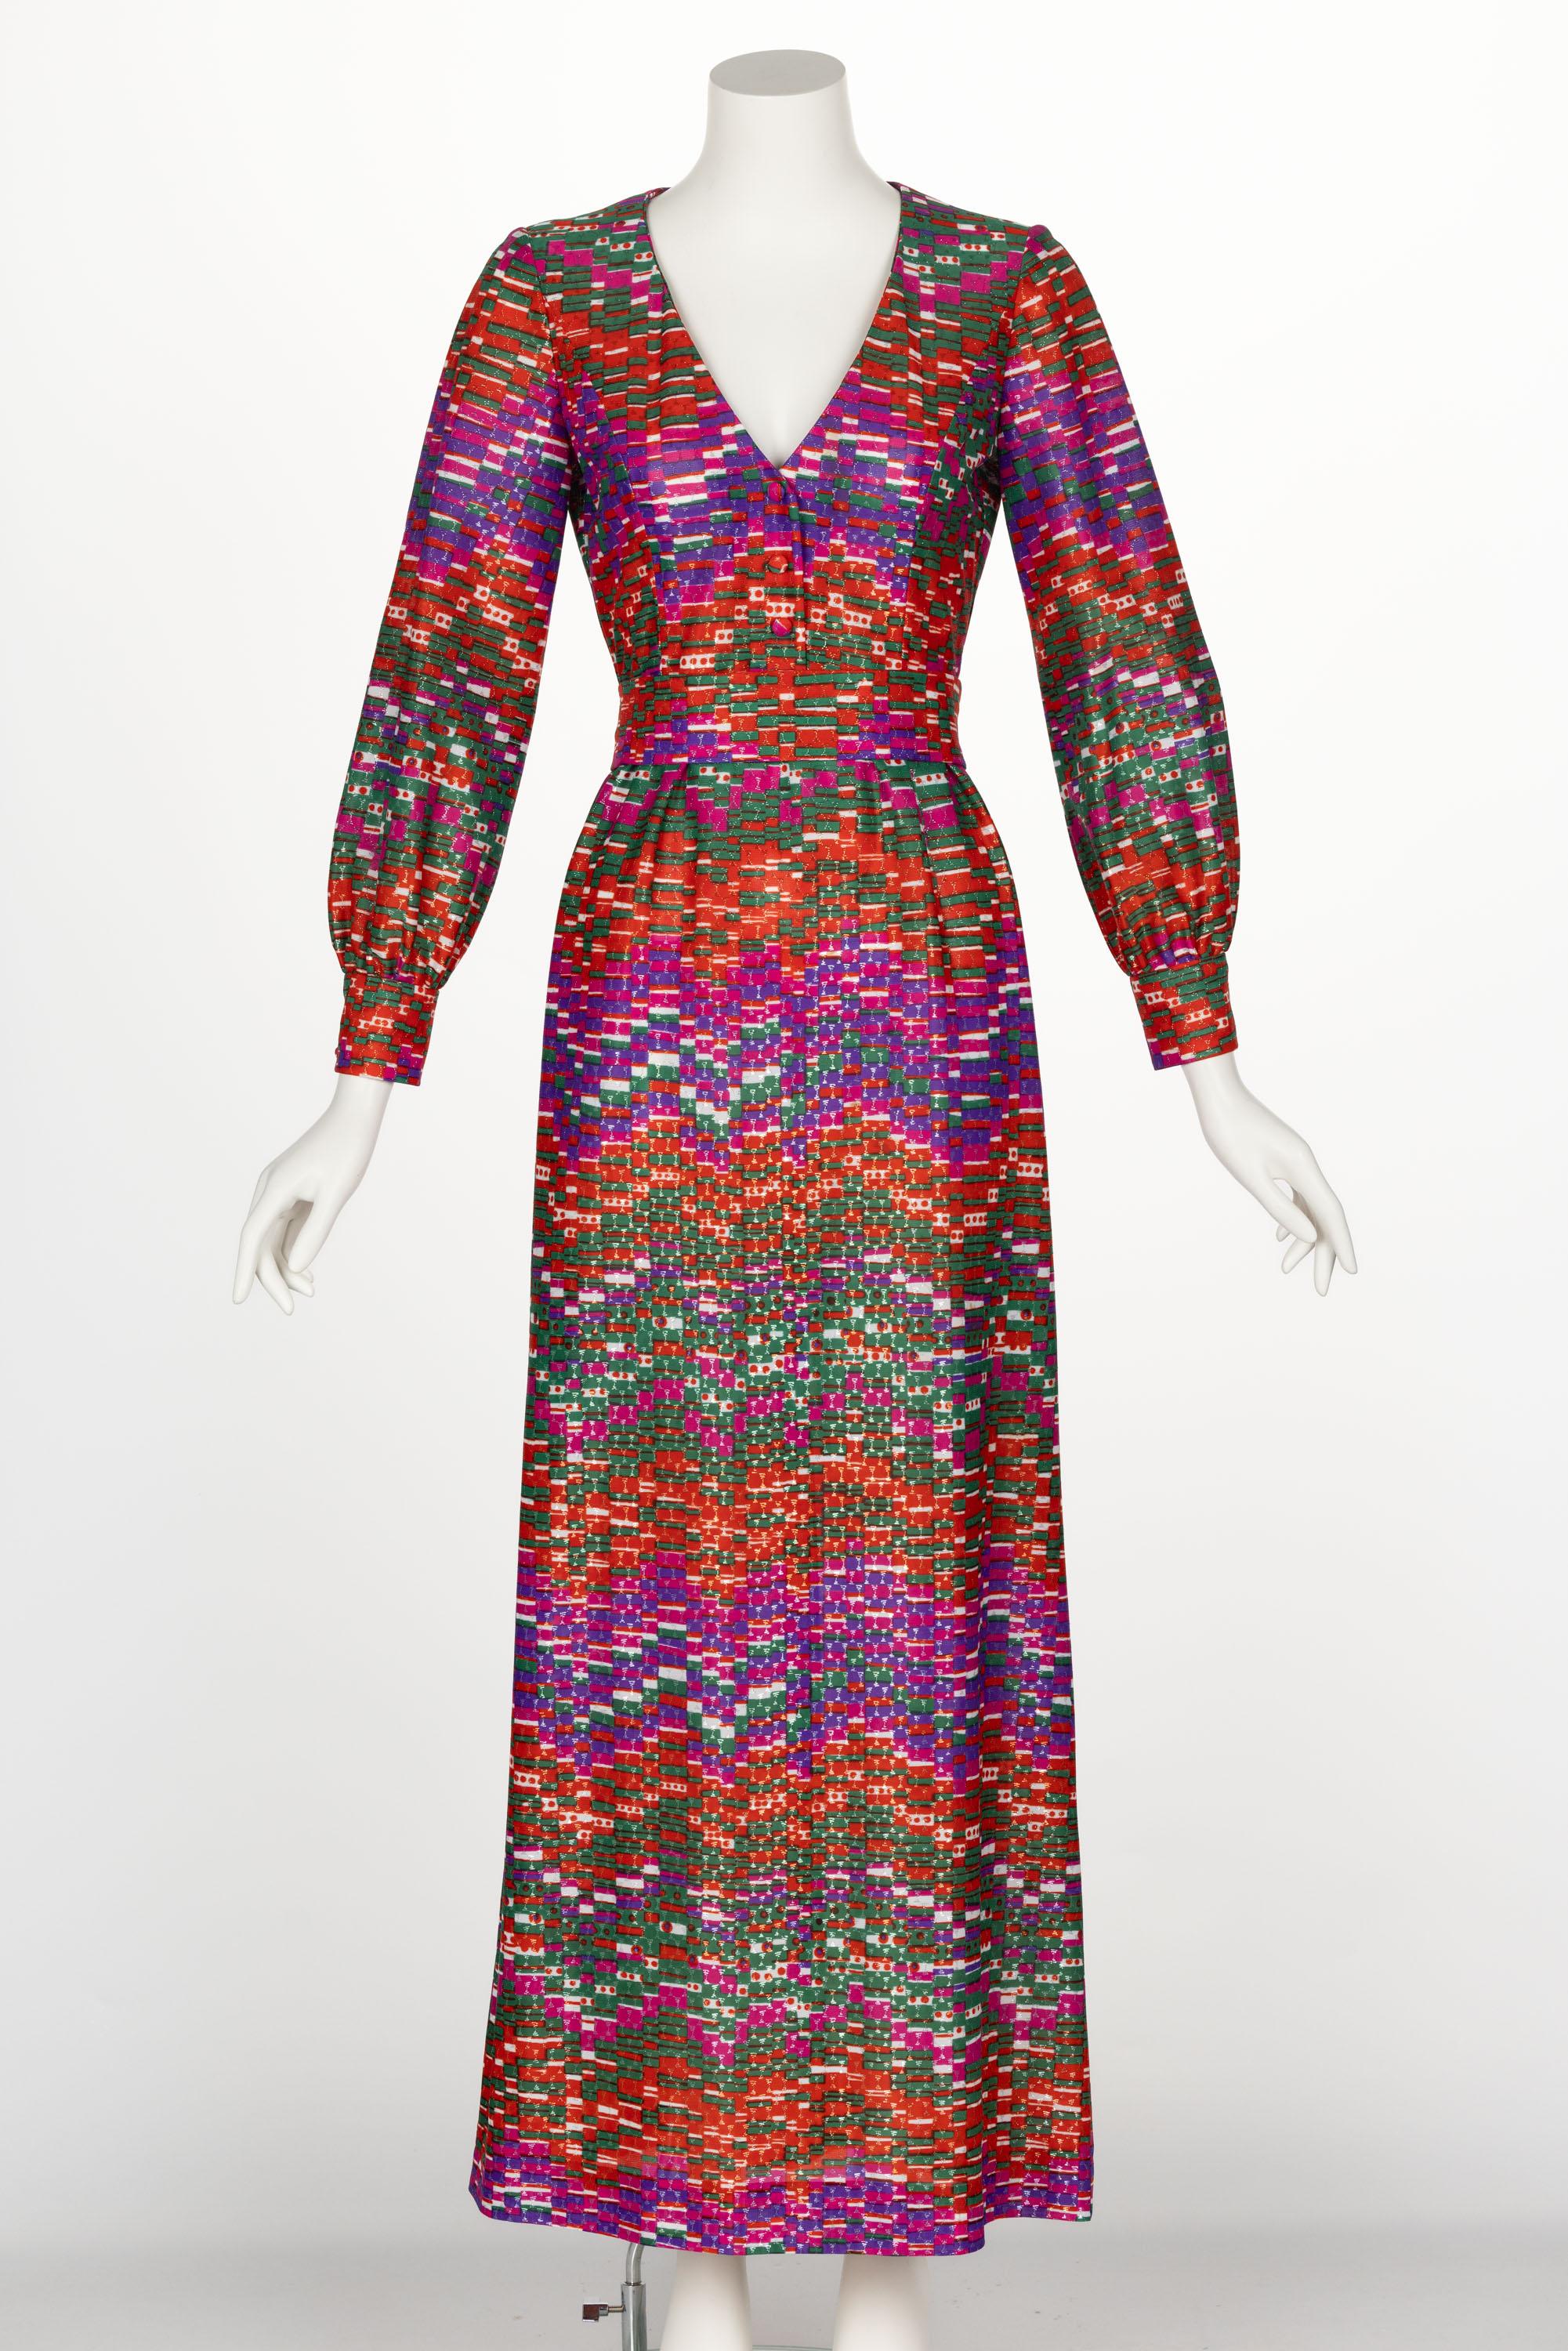 The designer of this dress is unknown, but that makes it no less captivating. Done in a synthetic metallic knit, this beautiful maxi dress hits all the right notes. The dress features an abstract print in shades of purple, white, orange, pink, and